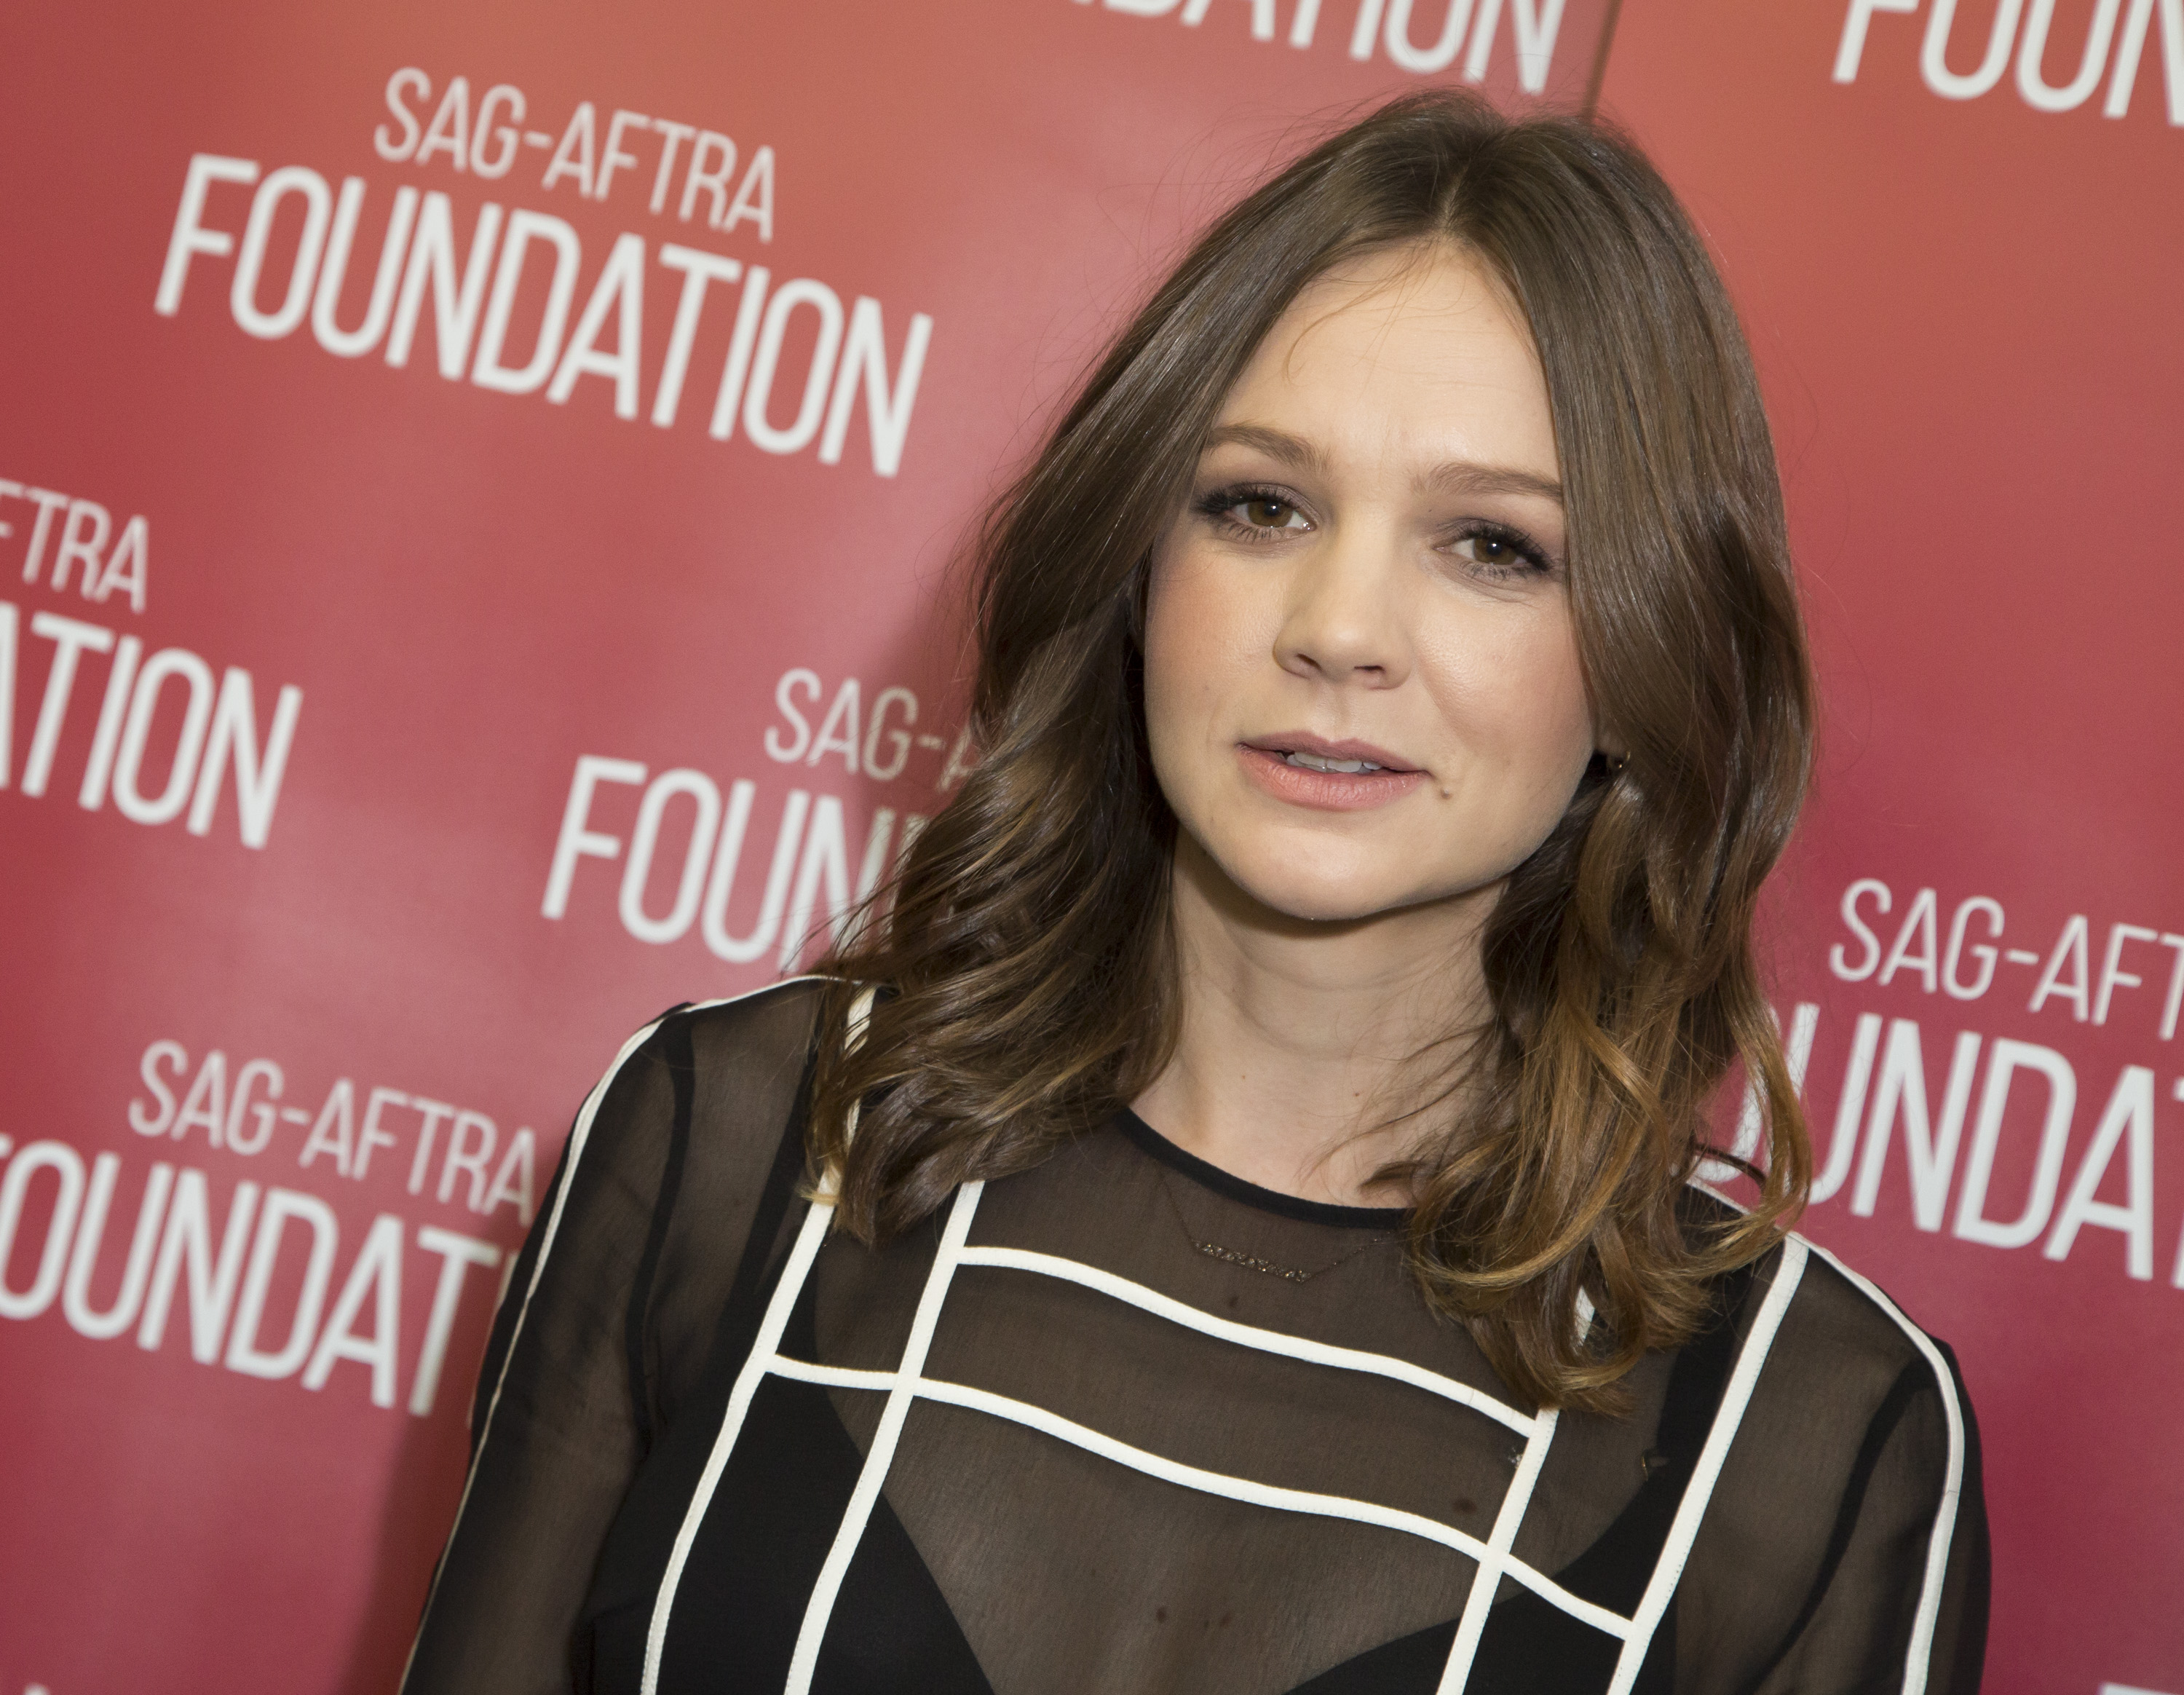 Actress Carey Mulligan attends the SAG-AFTRA Foundation conversation in Los Angeles, California. (Vincent Sandoval&mdash;Getty Images)